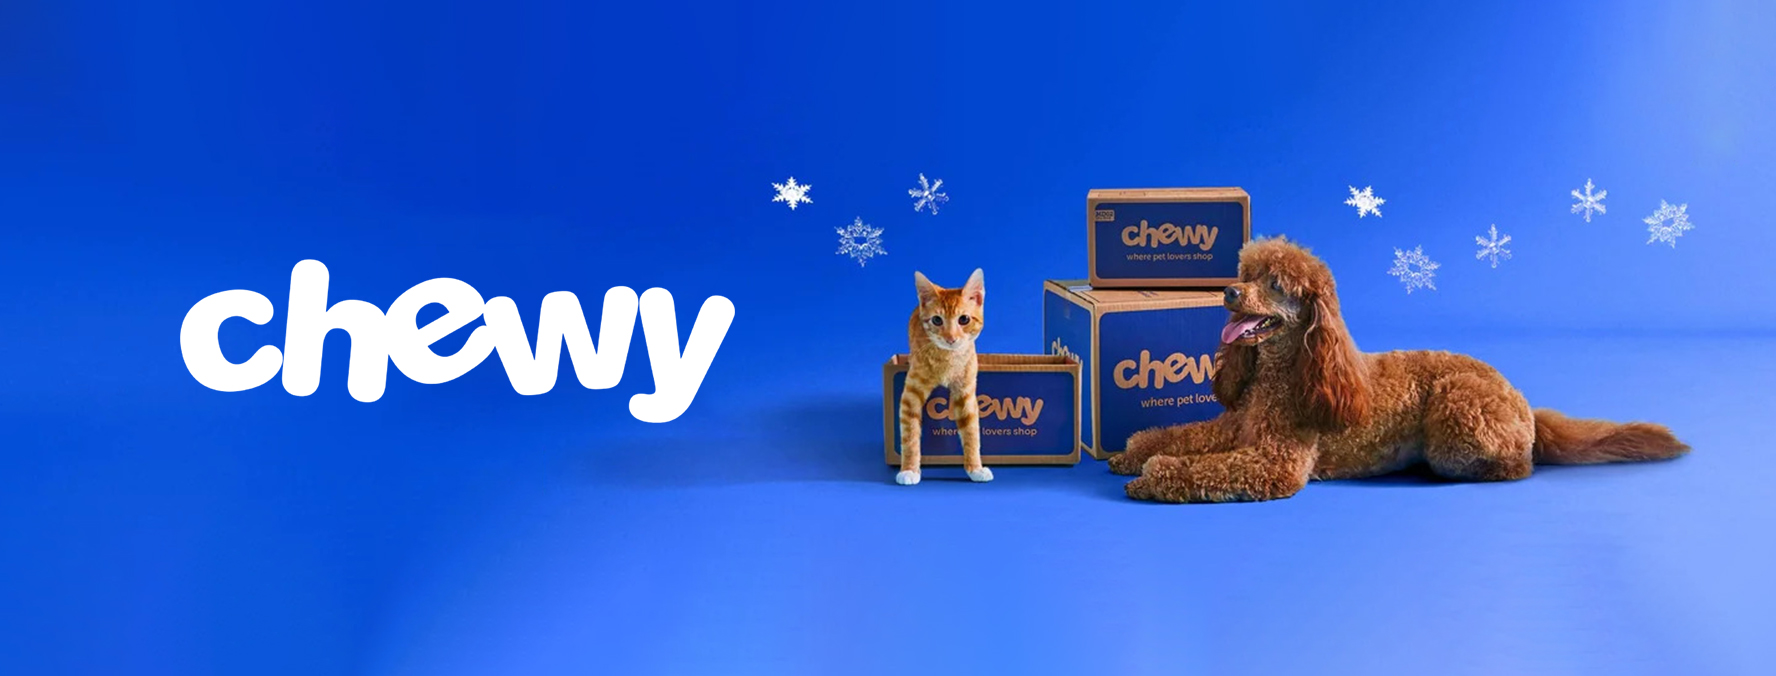 A dog and cat pose next to boxes of Chewy Inc products against a blue background and the white colored logo of Chewy Inc to the left